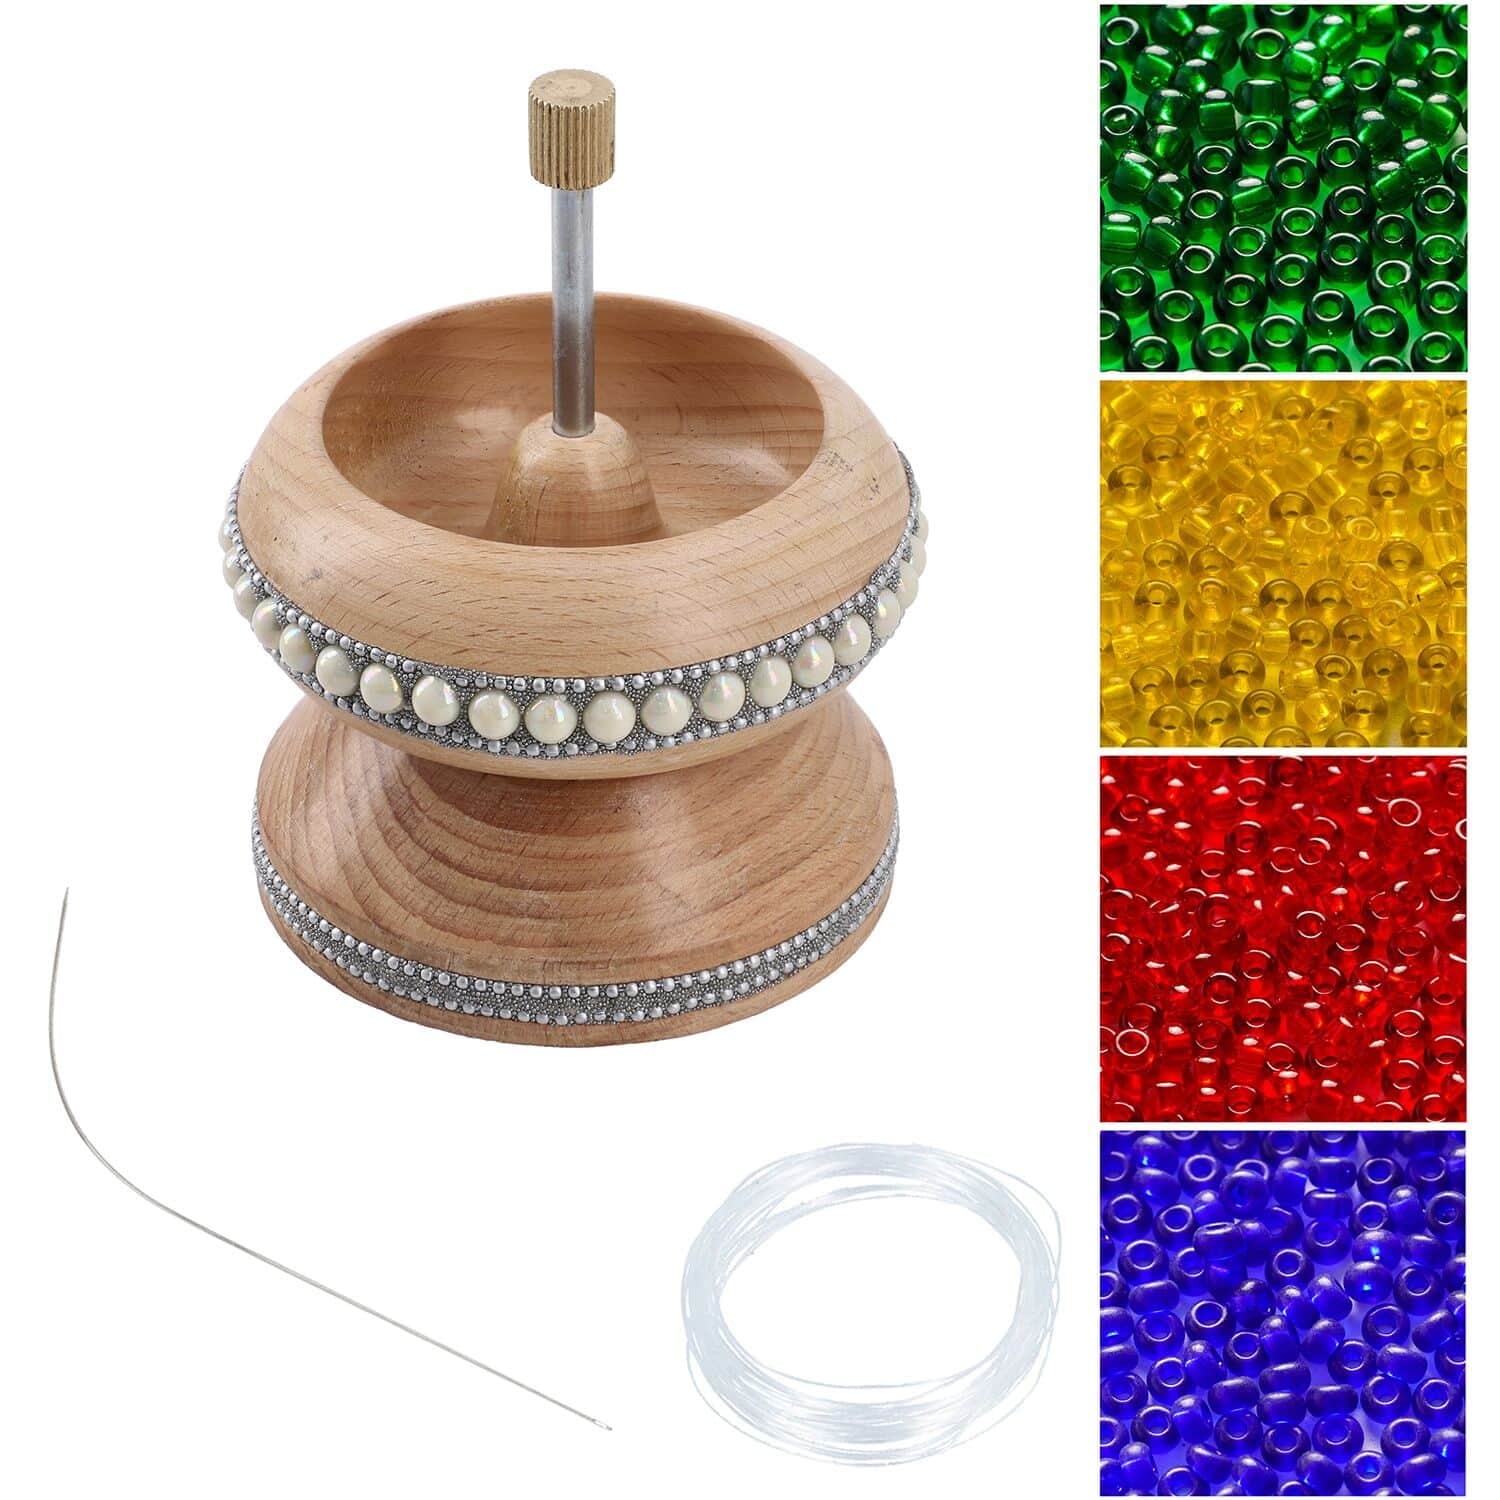 PP OPOUNT Bead Spinner with 2 PCS Exlarge Eye Beading Needles, Wooden Spin  Bead Loader for DIY Seed Beads, Waist Beads, Bracelets, Spin Beading Bowl,  Bead Bowl Spinner and Needles (Patent Protection)